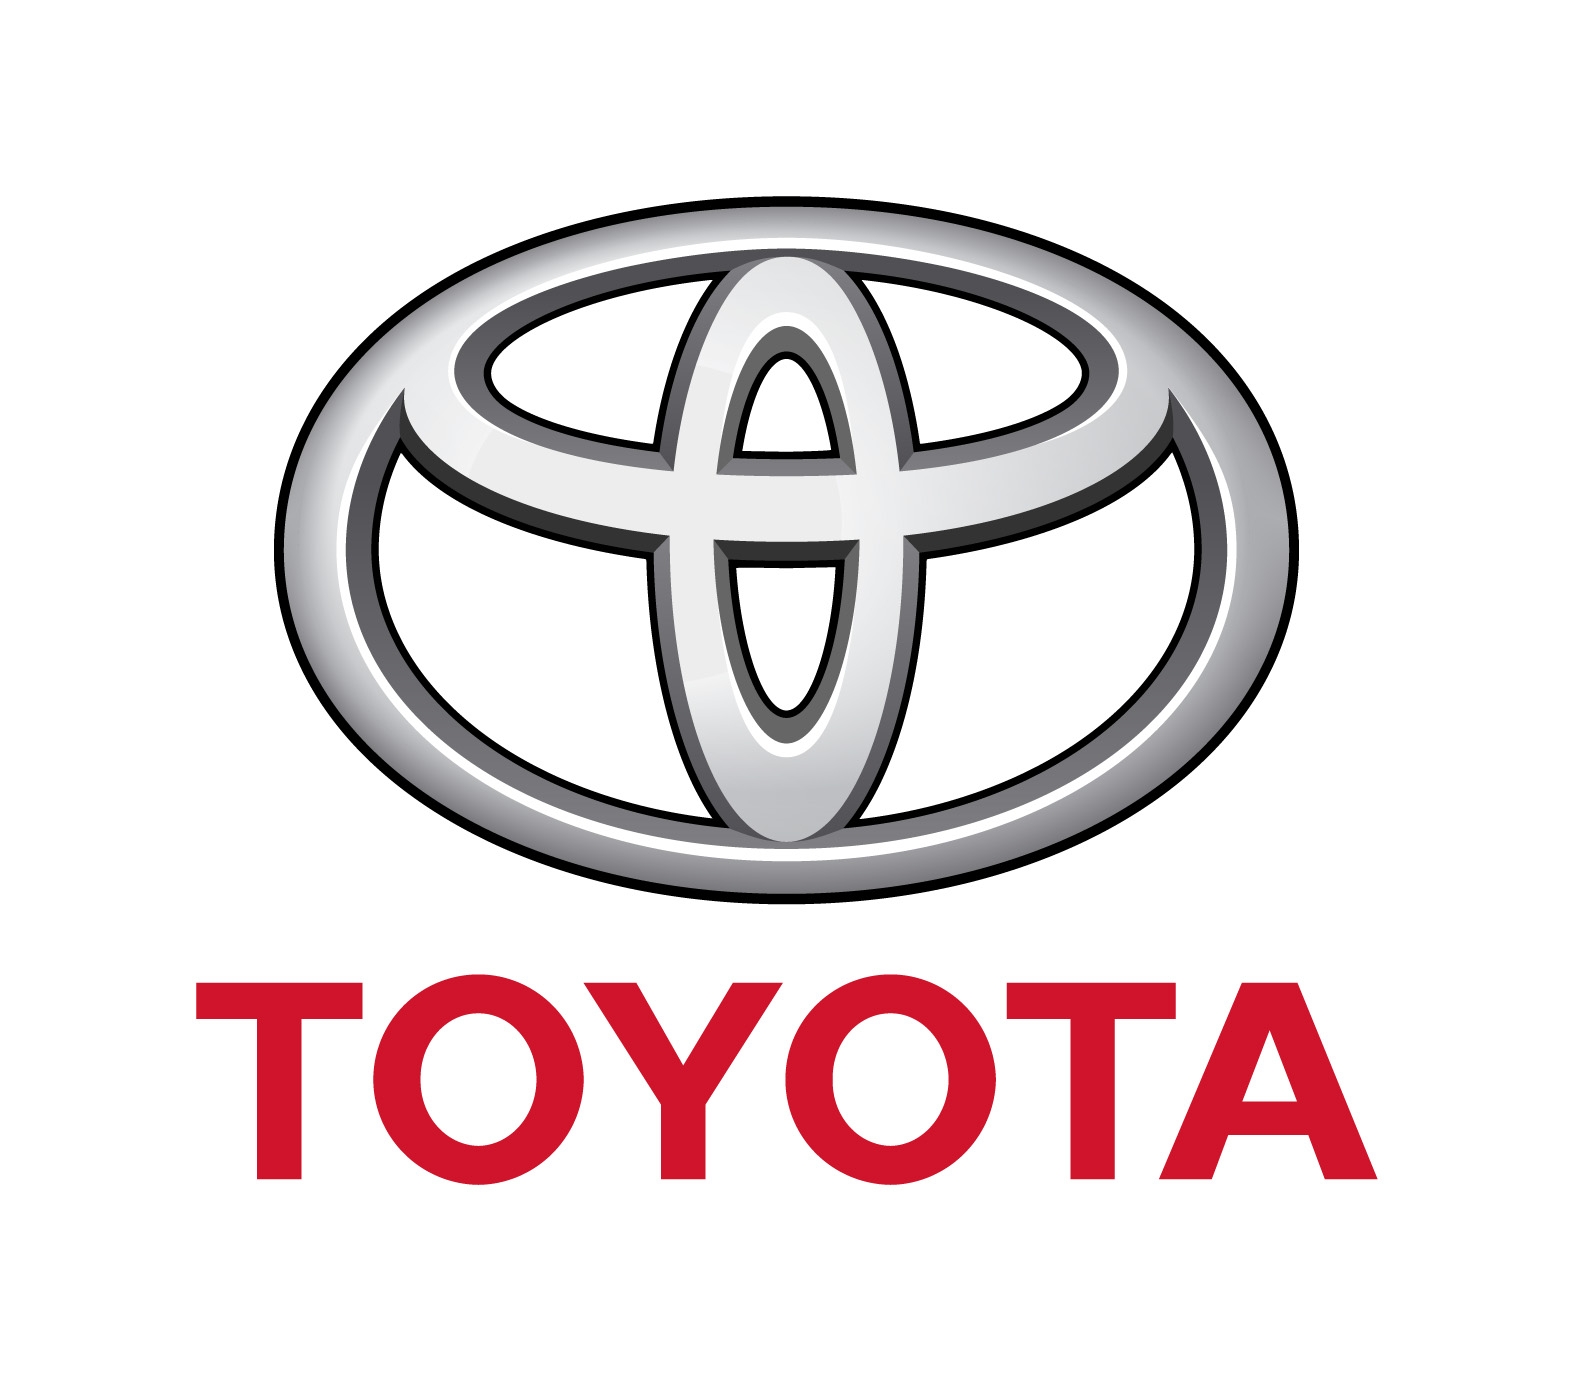 Toyota to Introduce Auctions in Used Cars